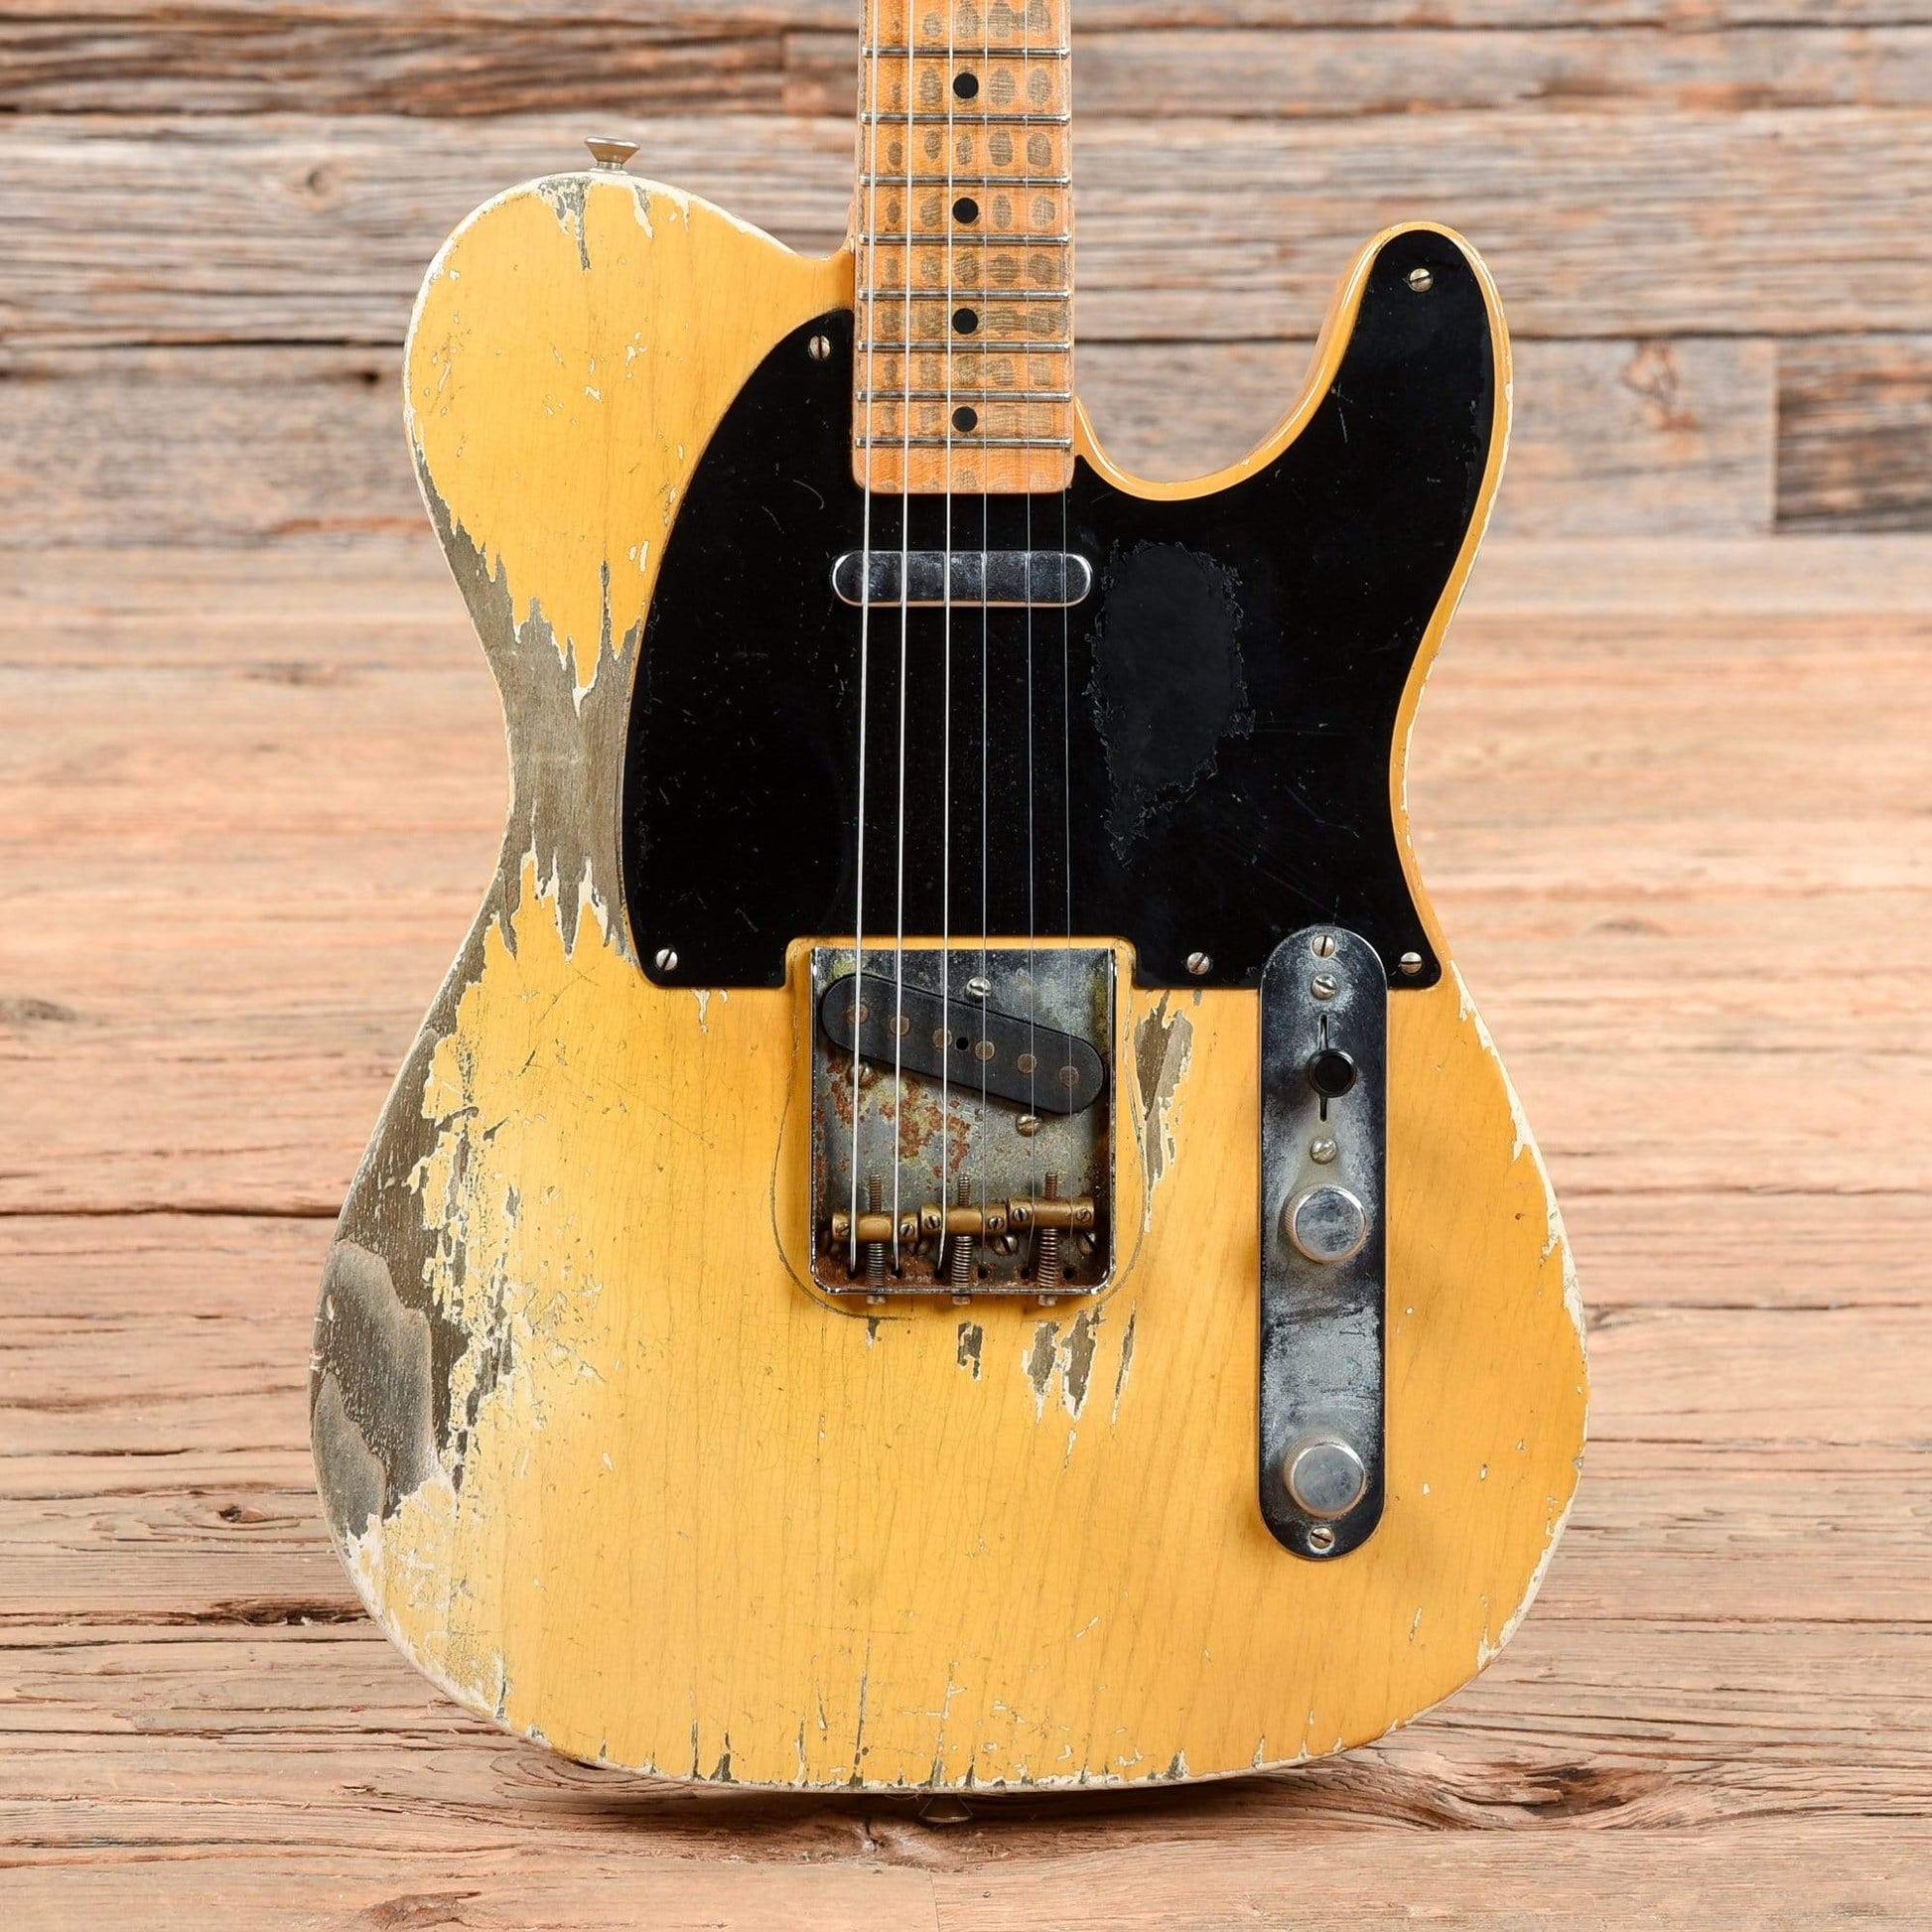 Fender Custom Shop 1951 Telecaster Heavy Relic Masterbuilt by Dale Wilson Nocaster Blonde 2017 Electric Guitars / Solid Body